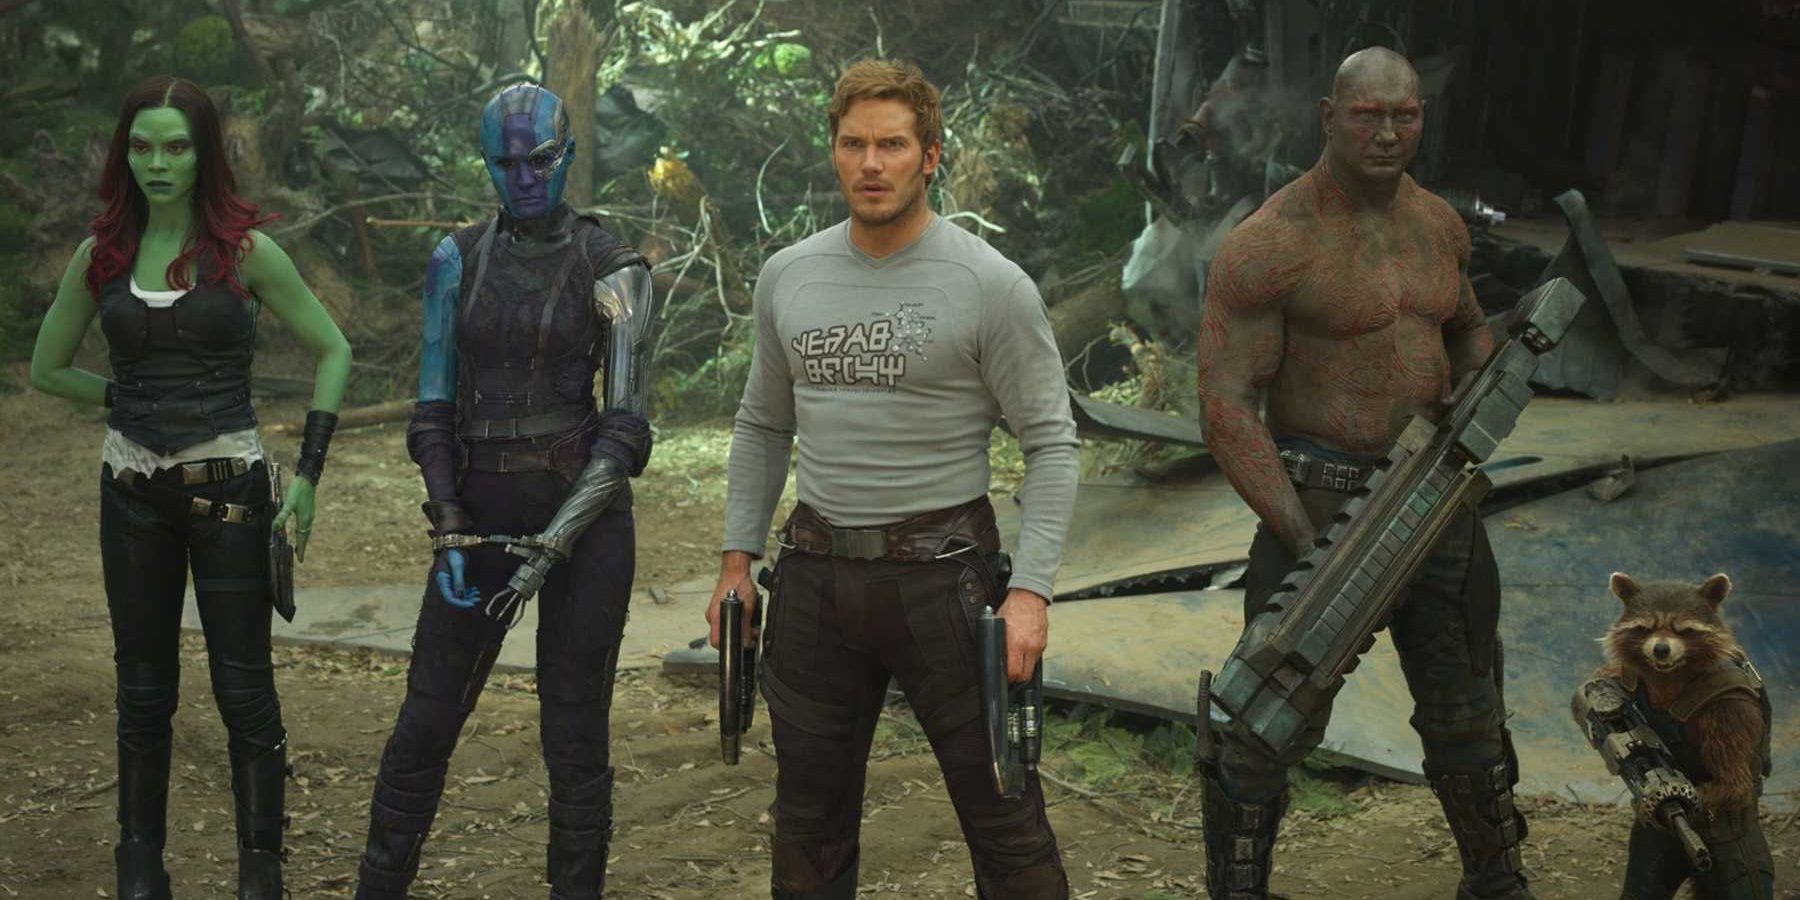 The team in Guardians of the Galaxy Vol 2